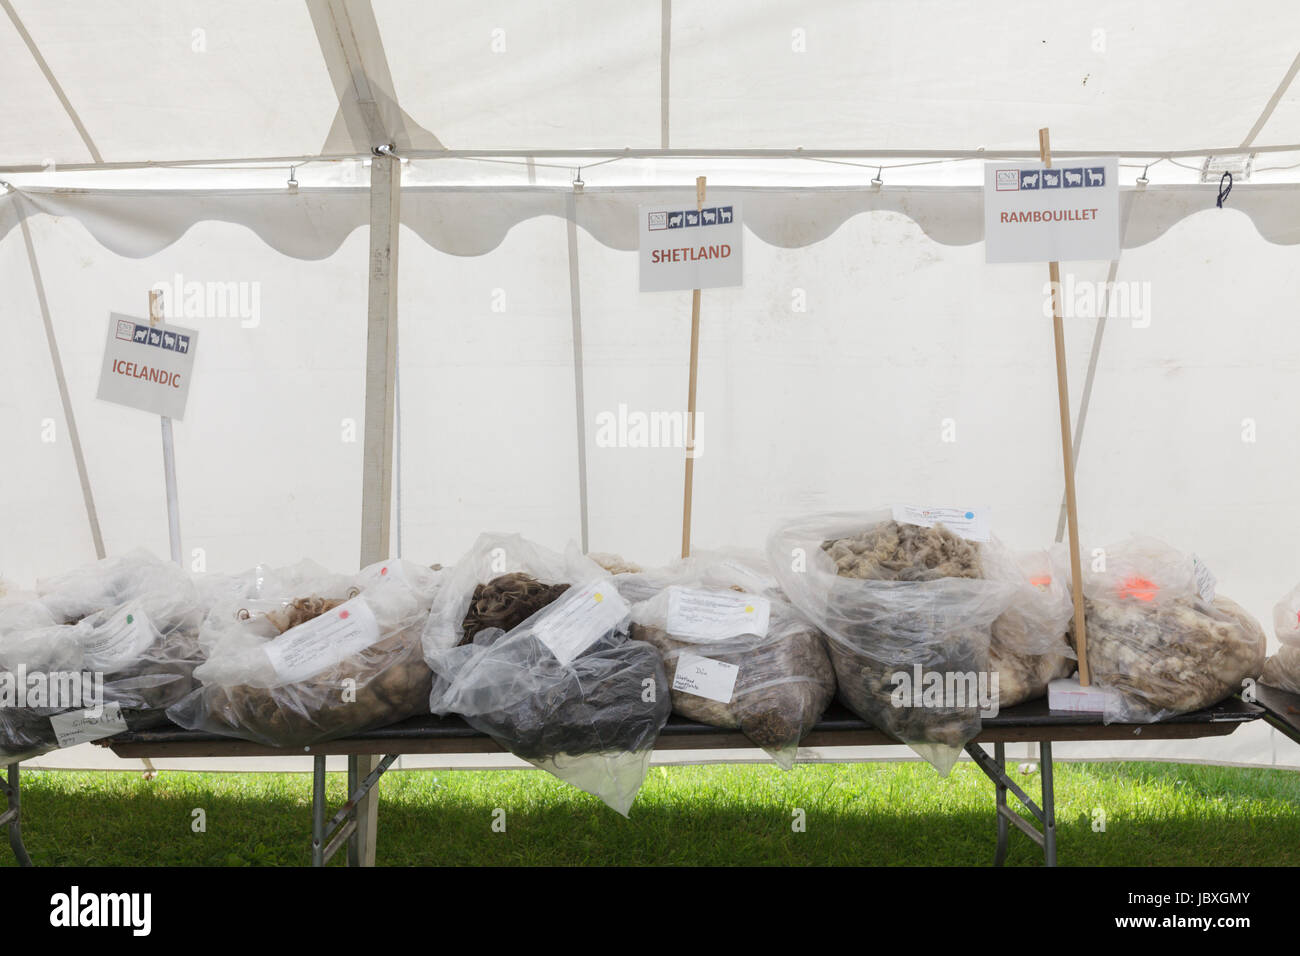 BOUCKVILLE, NY, USA - JUNE 10 2017: Bags of different types of wool on display at the annual Fiber Festival of Central New York. Stock Photo